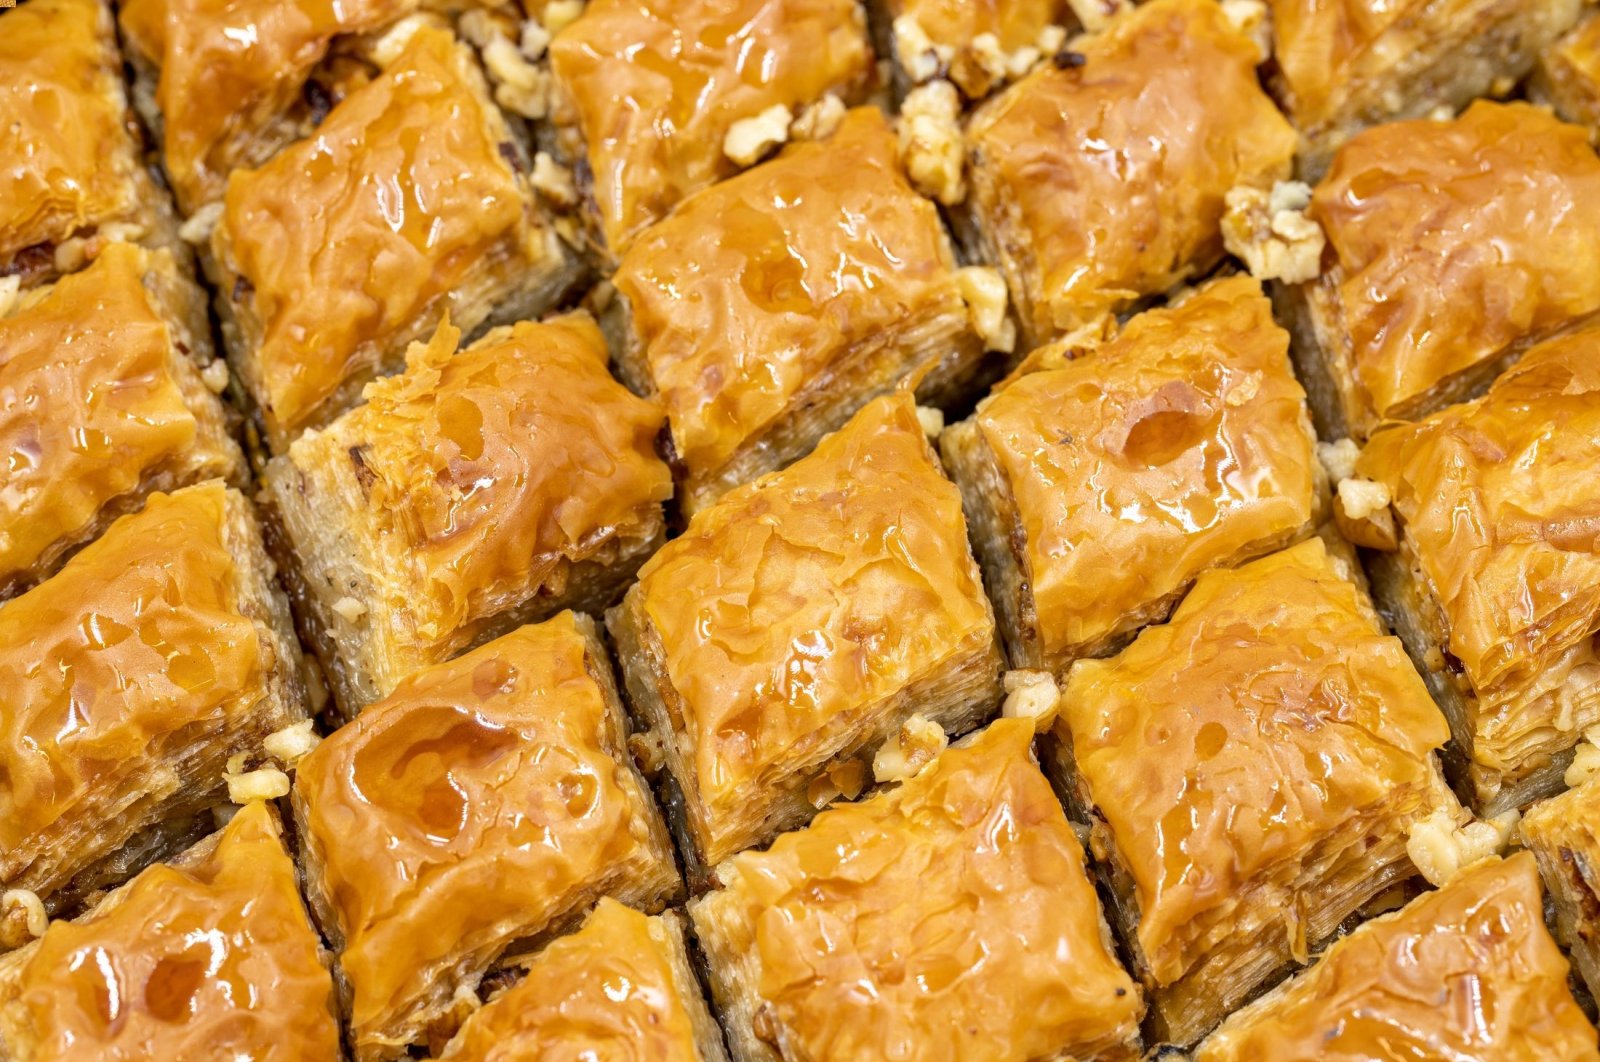 Baklava, one of the most classic Turkish desserts, has hundreds of varieties. (Shutterstock Photo)